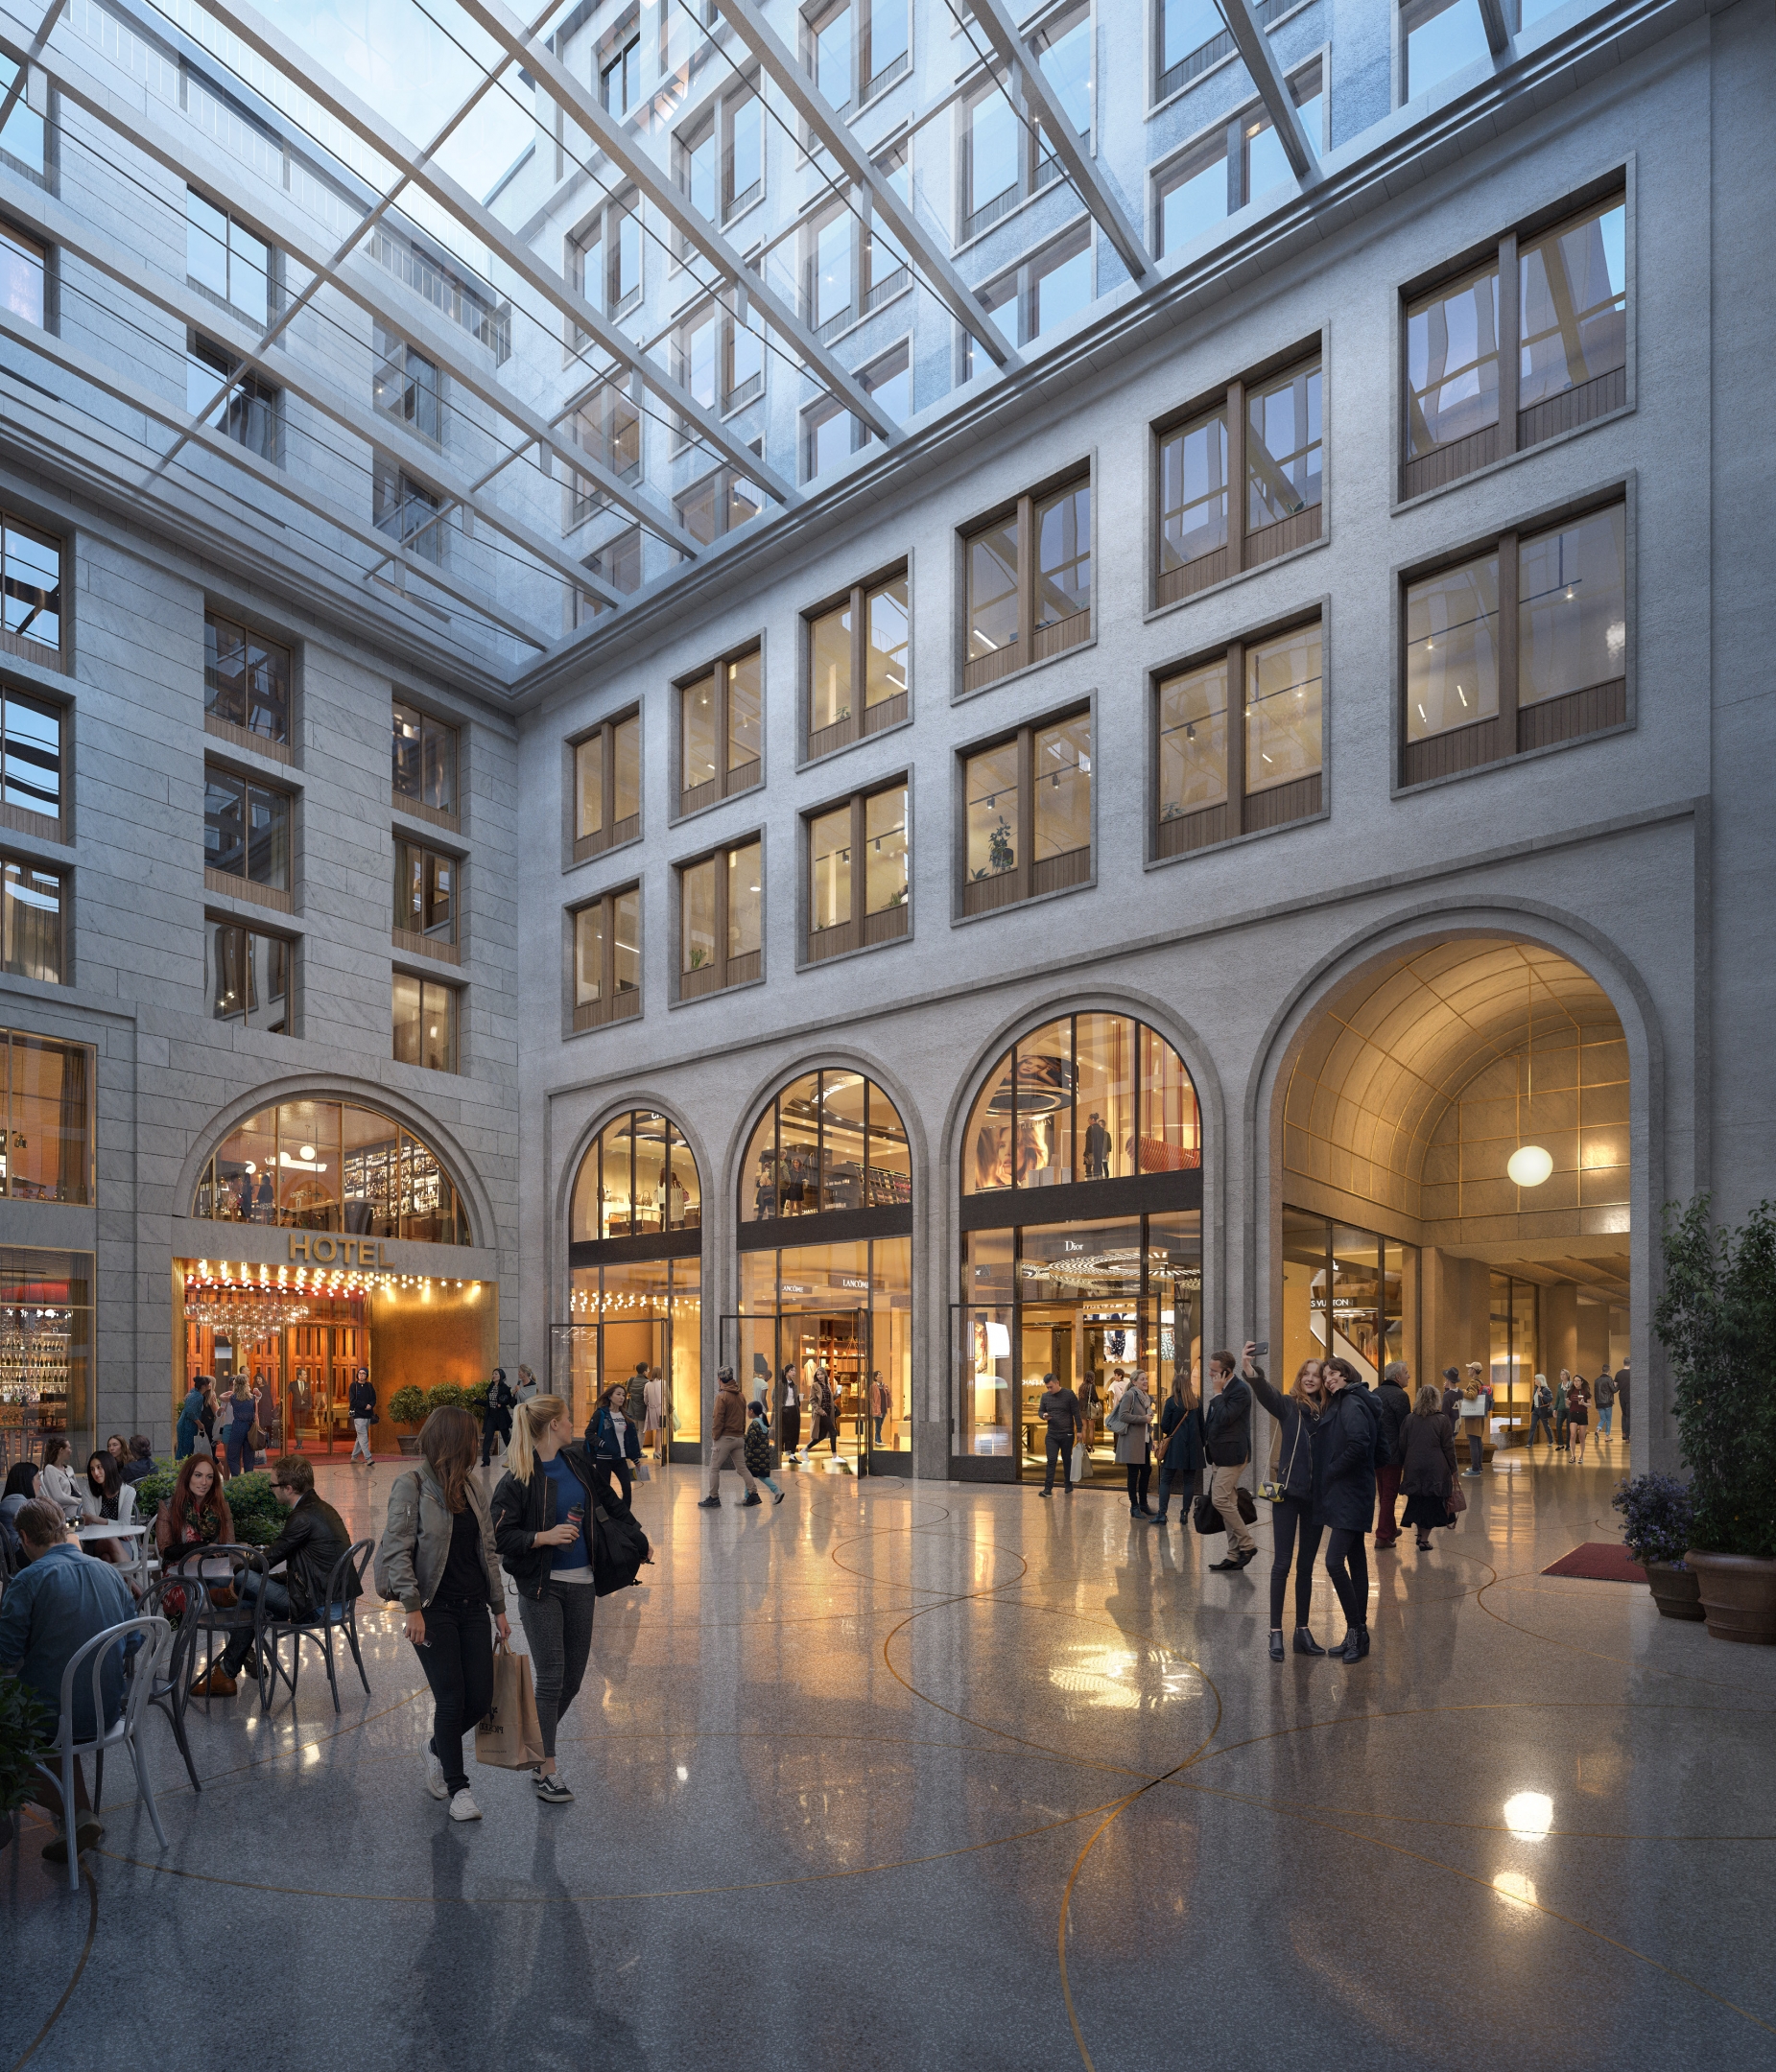 Architectural visualization of Stureplanskvarteret for TAM Group. A image of the interior inside a retail buildning with glass roof. People walking around in the mall square. In daylight.